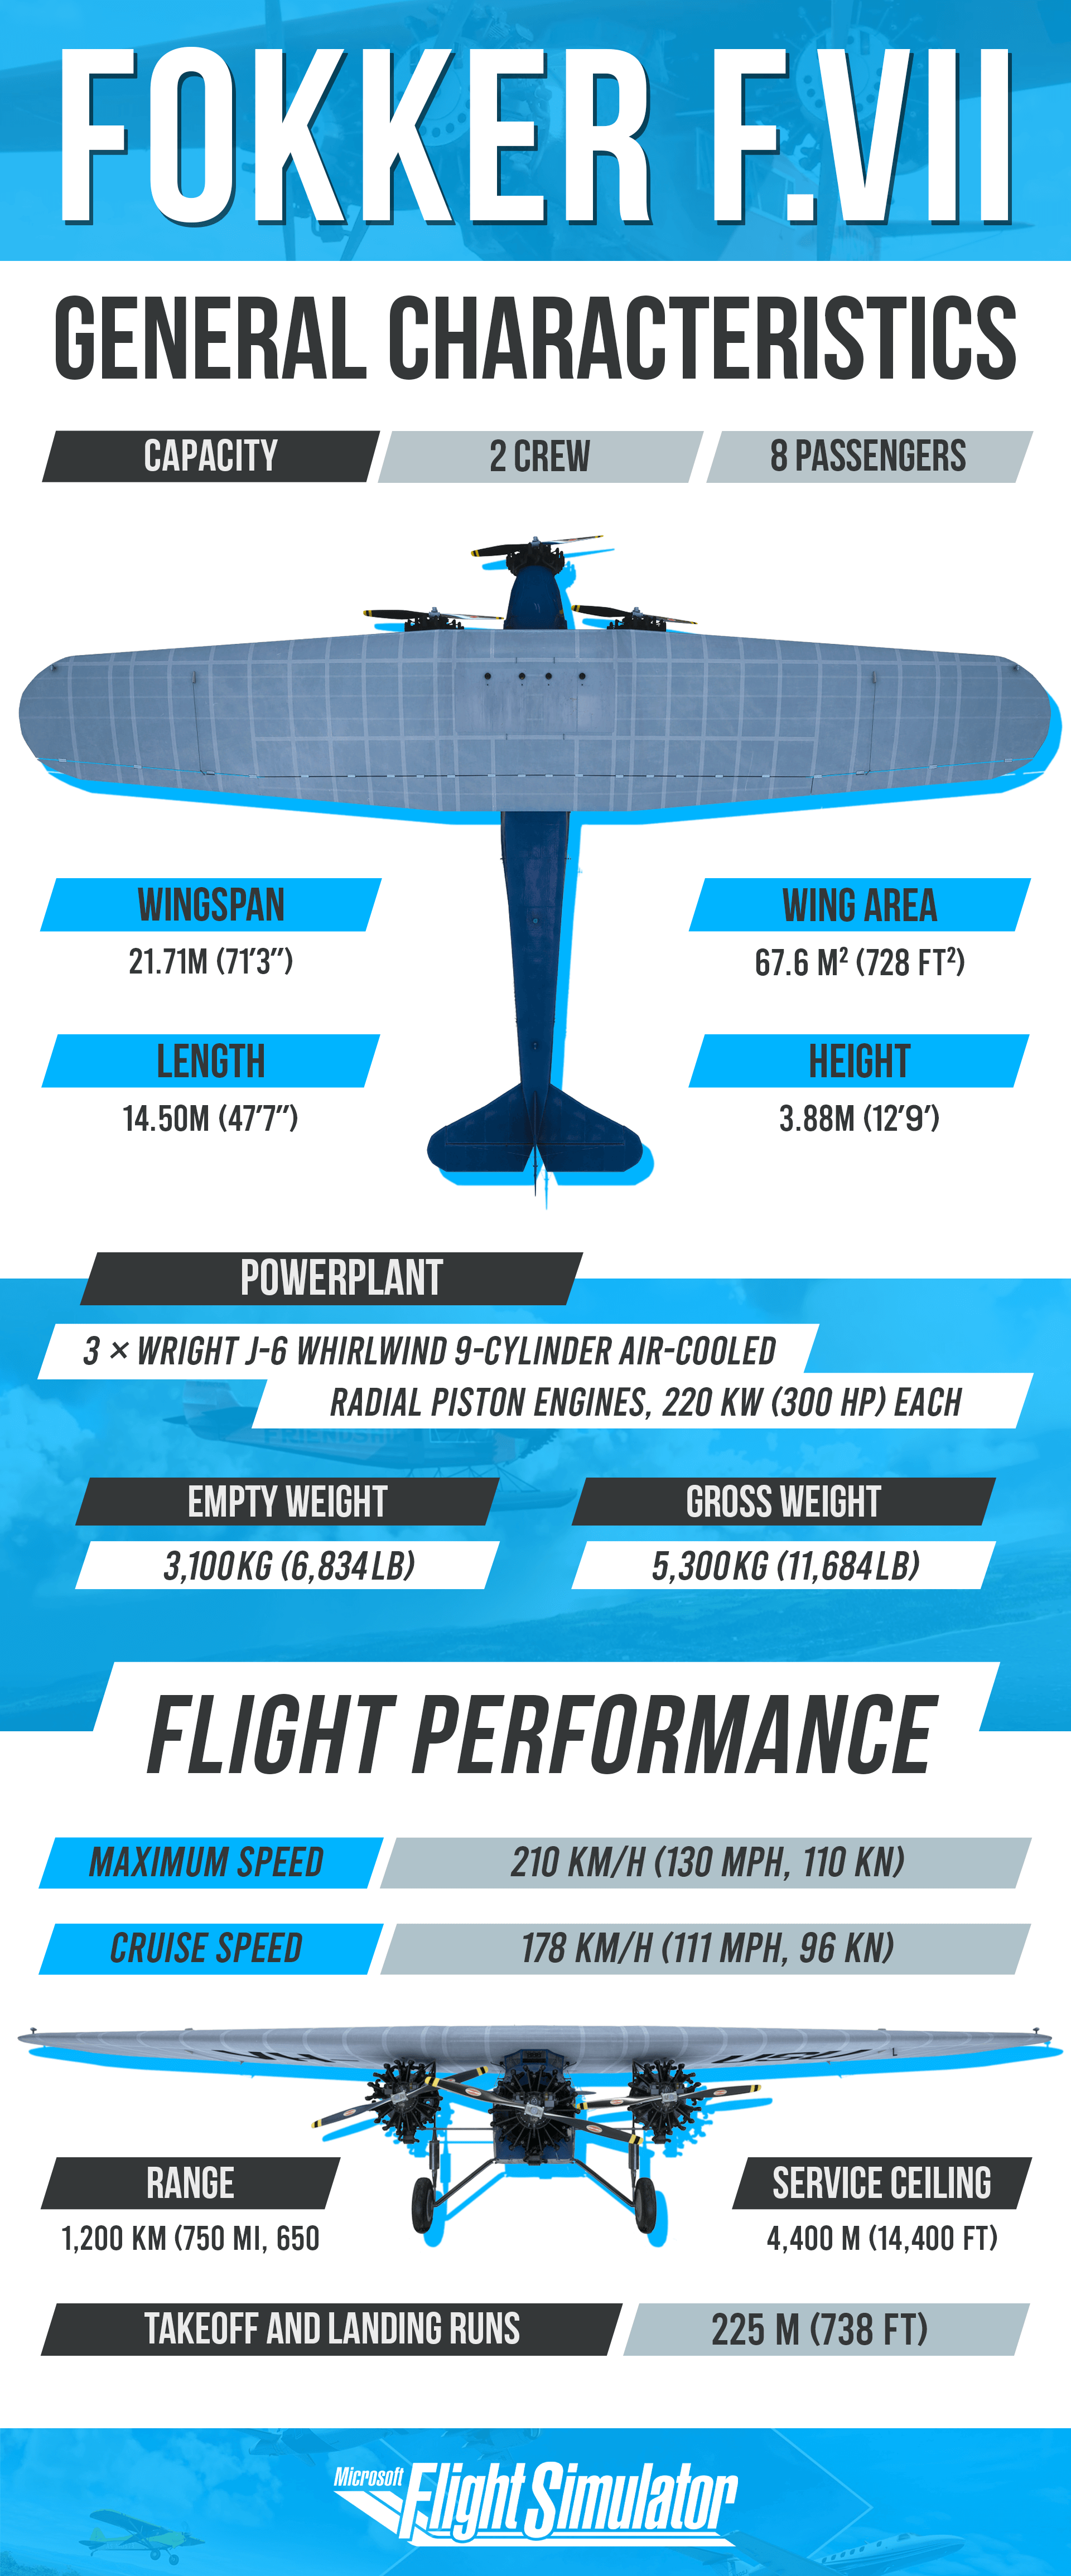 An infographic showing the dimensions and performance of the Fokker F.VII